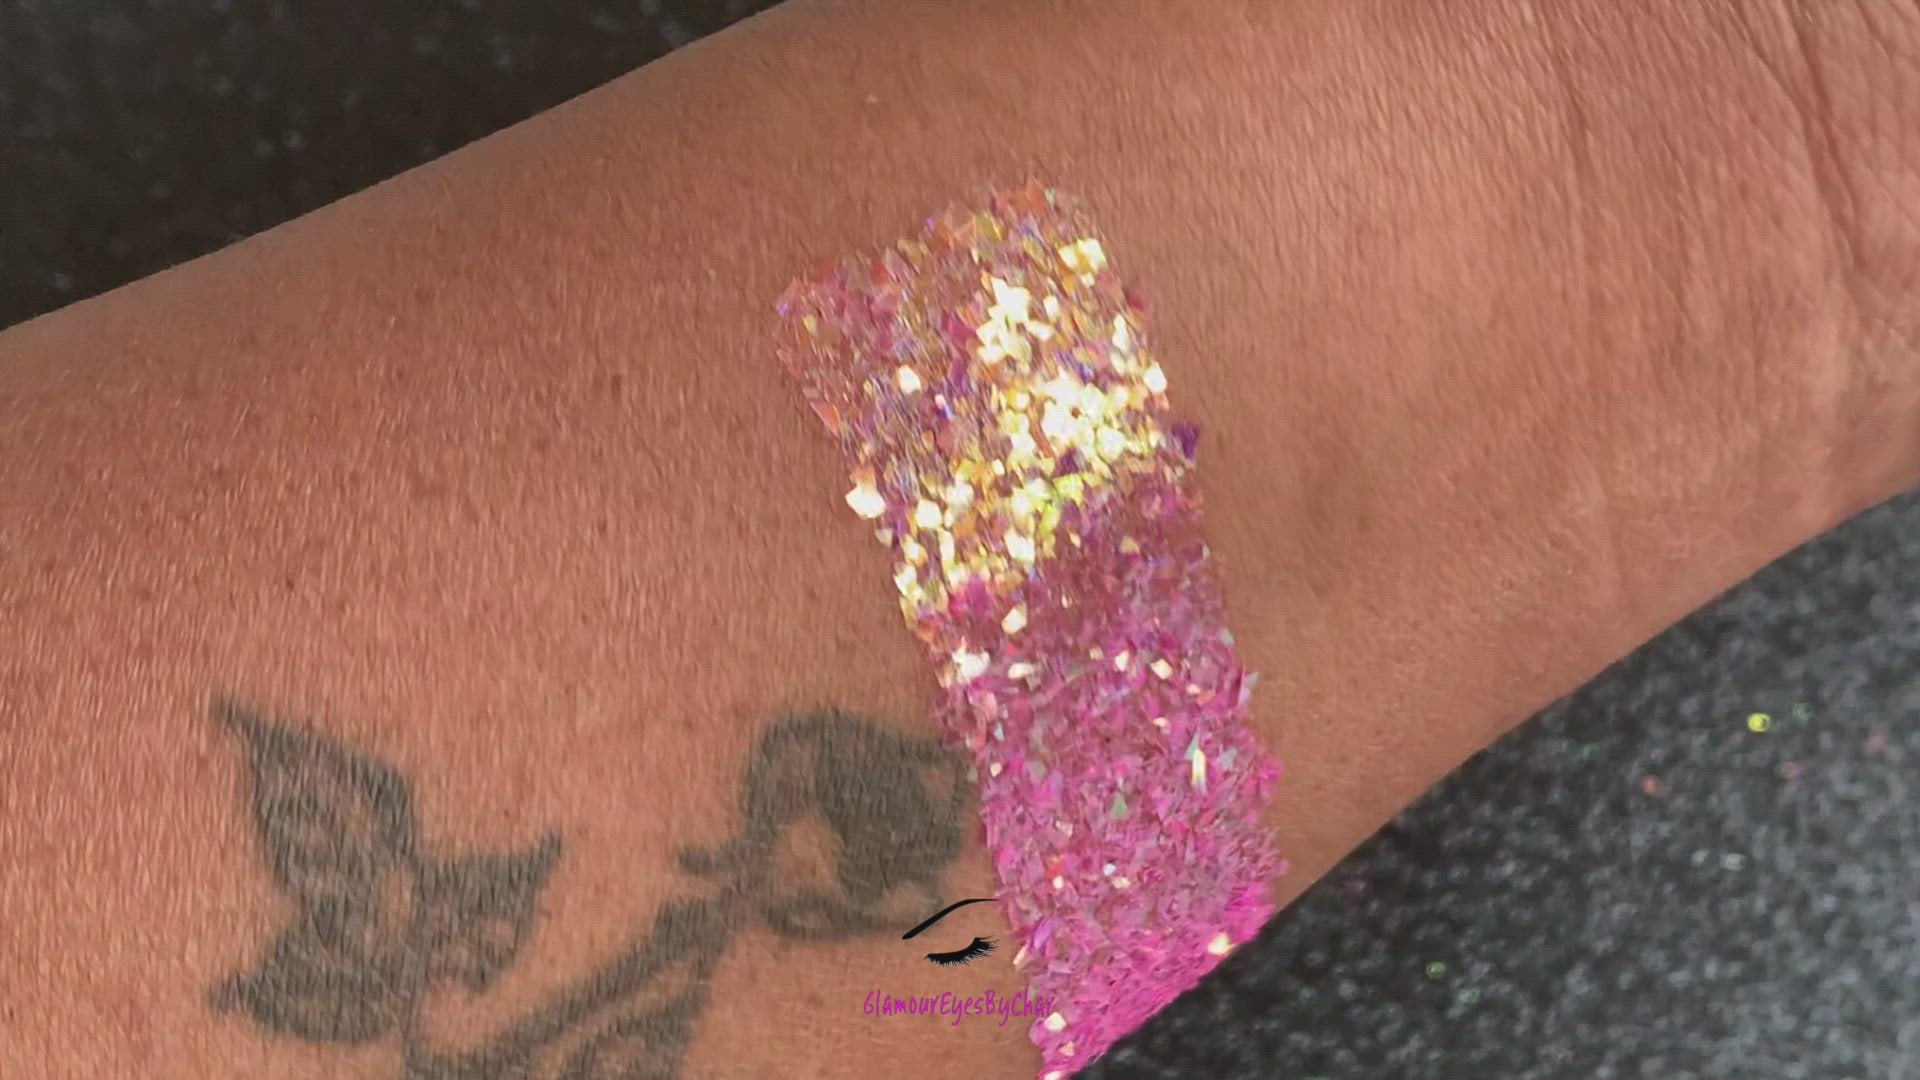 This glitter is called Princess Pink and is part of the cellophane glitter flakes collection. It consists of bright rose pink iridescent glitter shards with green and golden reflects. Angel's Kiss is perfect for body and nail art, glitter slime, resin art or DIY projects. Comes in 5g jars only.  